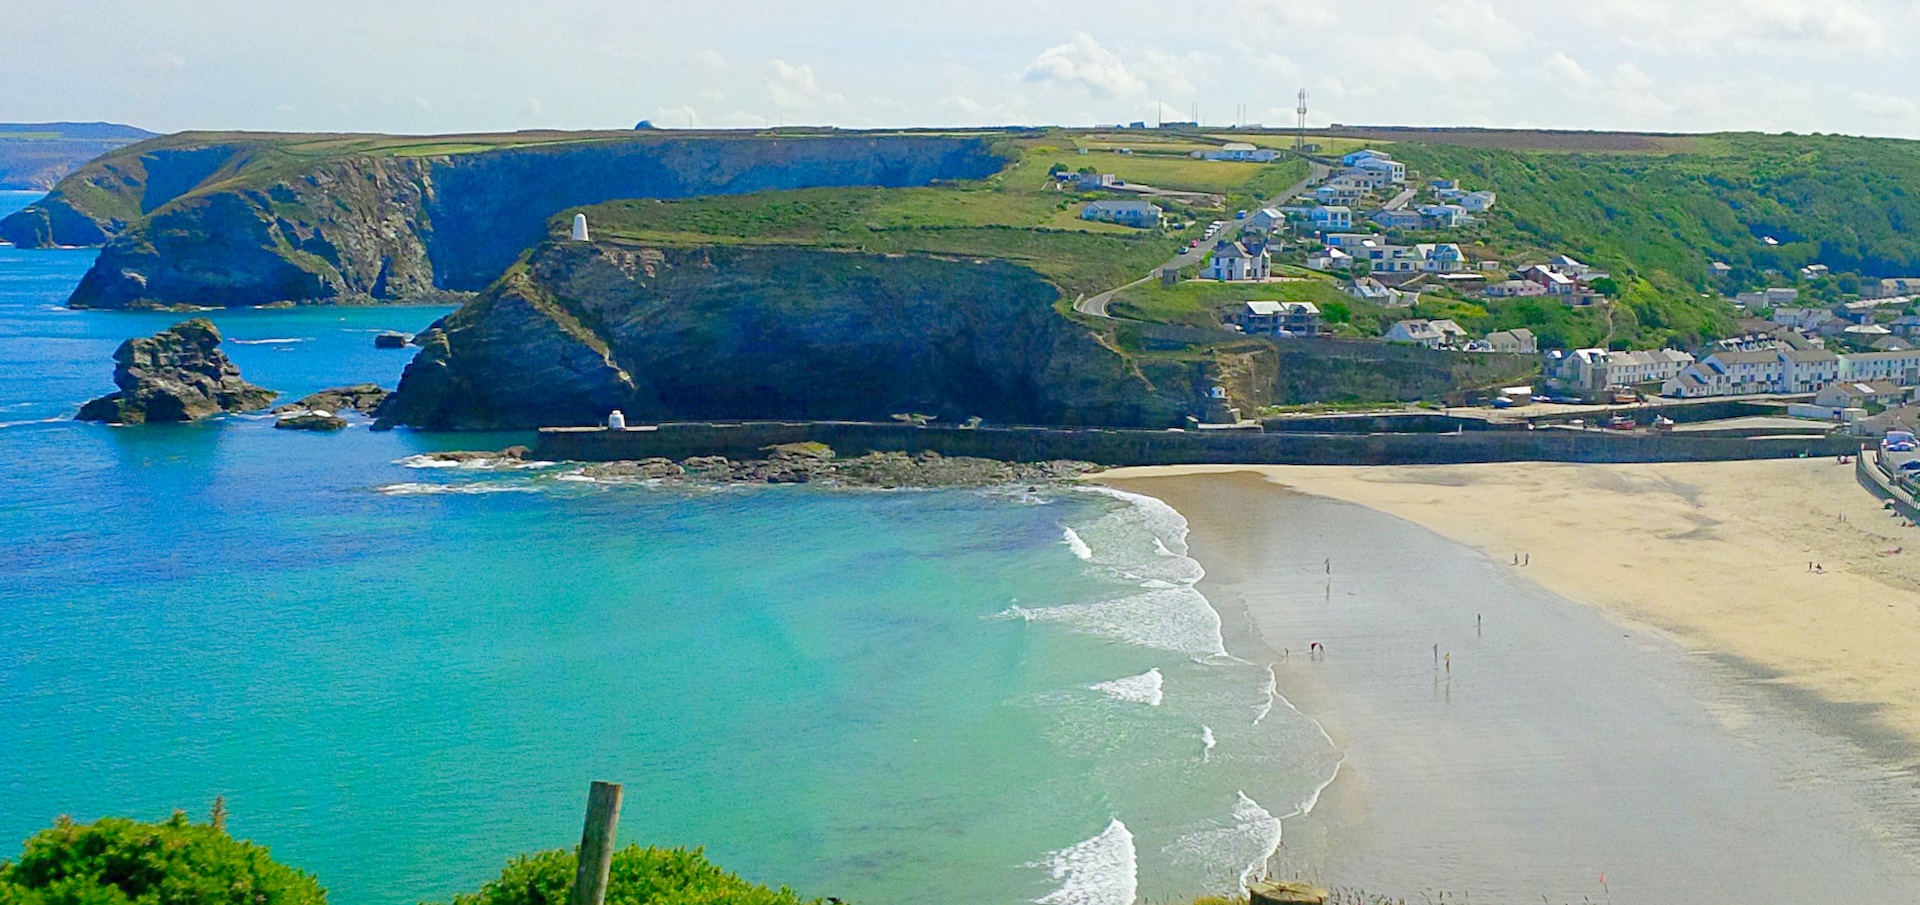 Portreath Beach and village in Cornwall seen from the cliffs